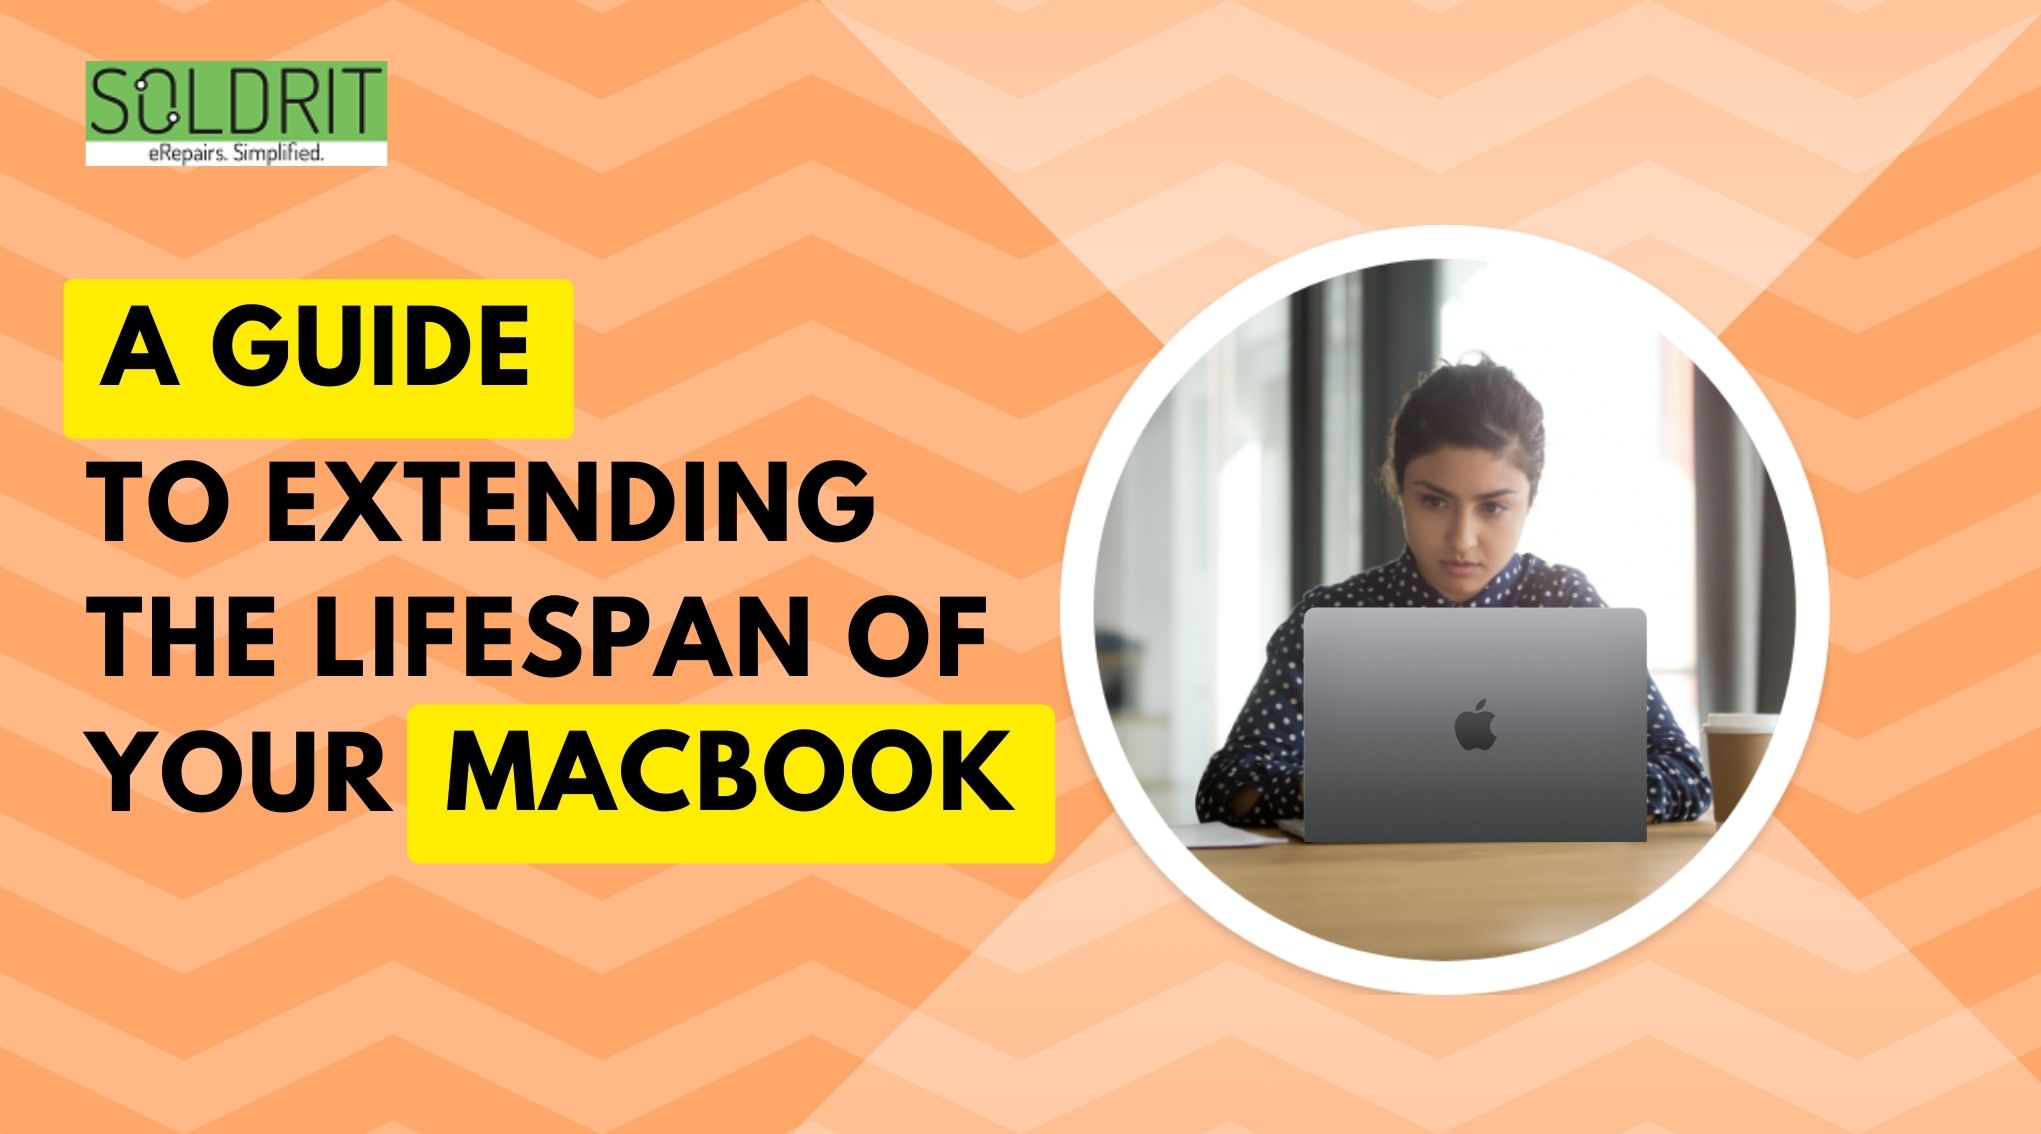 A Guide To Extending The Lifespan of Your MacBook